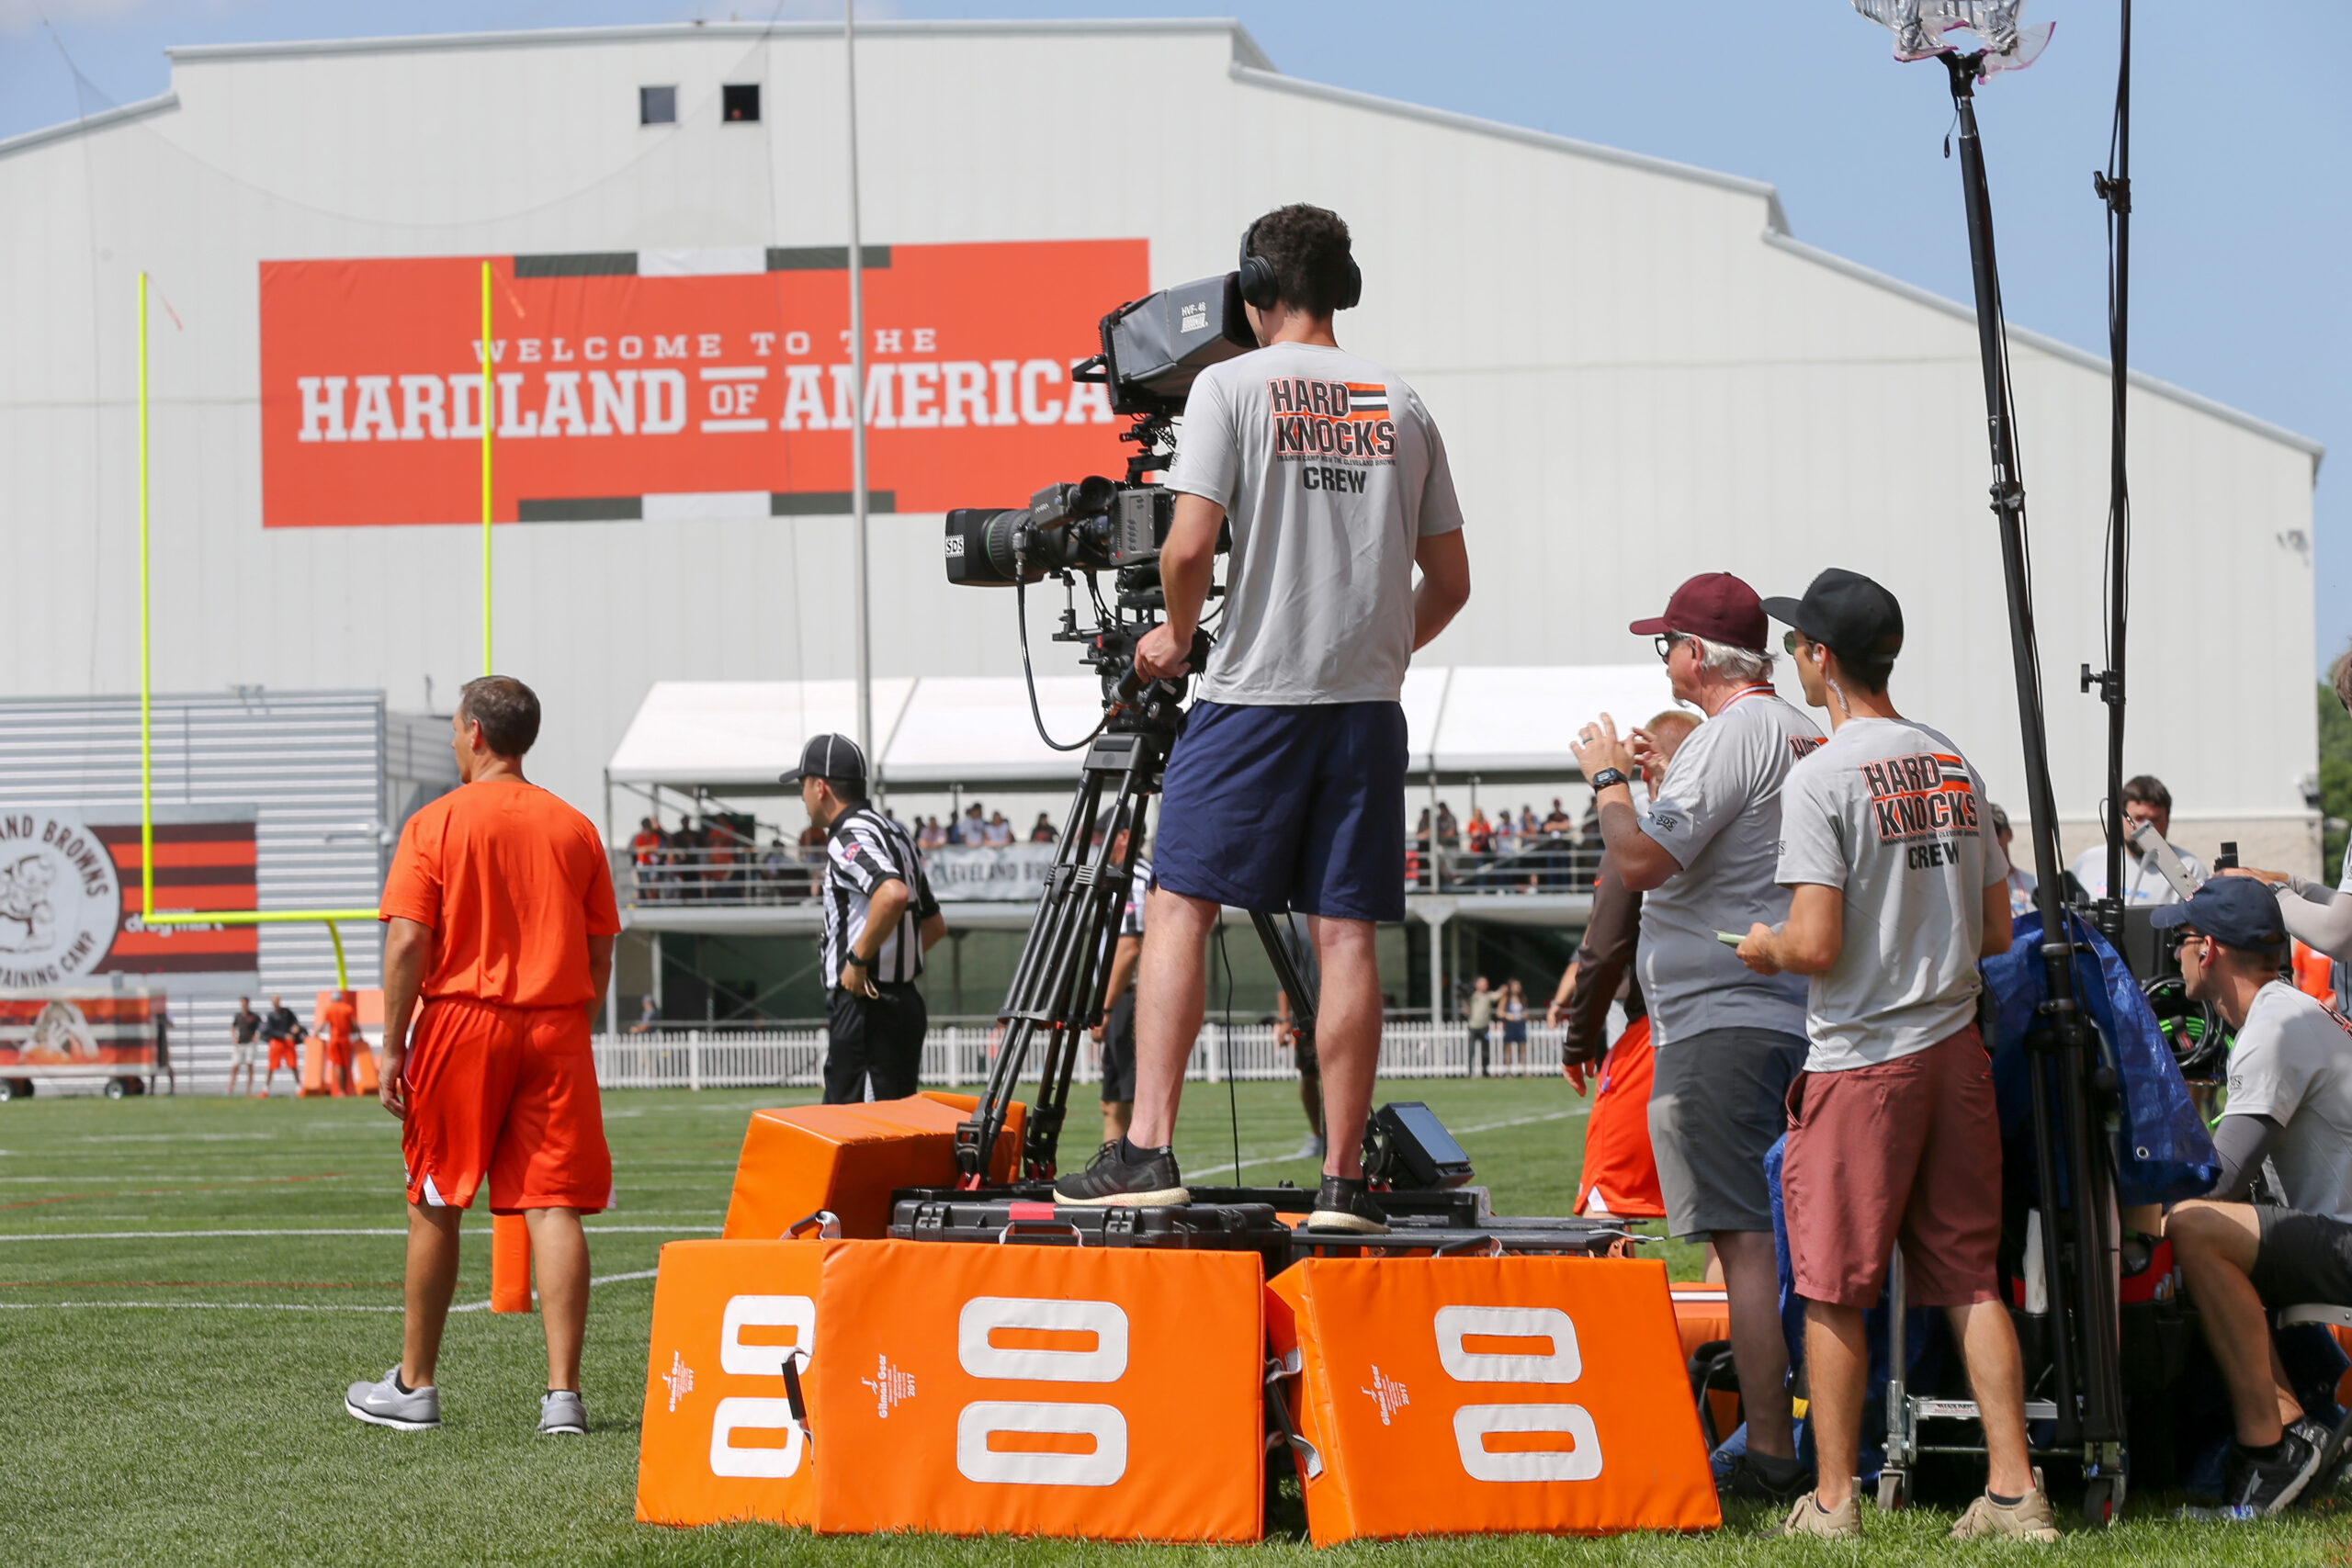 BEREA, OH - JULY 28: A film crew for the HBO show Hard Knocks films a drill during the Cleveland Browns Training Camp on July 28, 2018, at the at the Cleveland Browns Training Facility in Berea, Ohio. (Photo by Frank Jansky/Icon Sportswire via Getty Images)